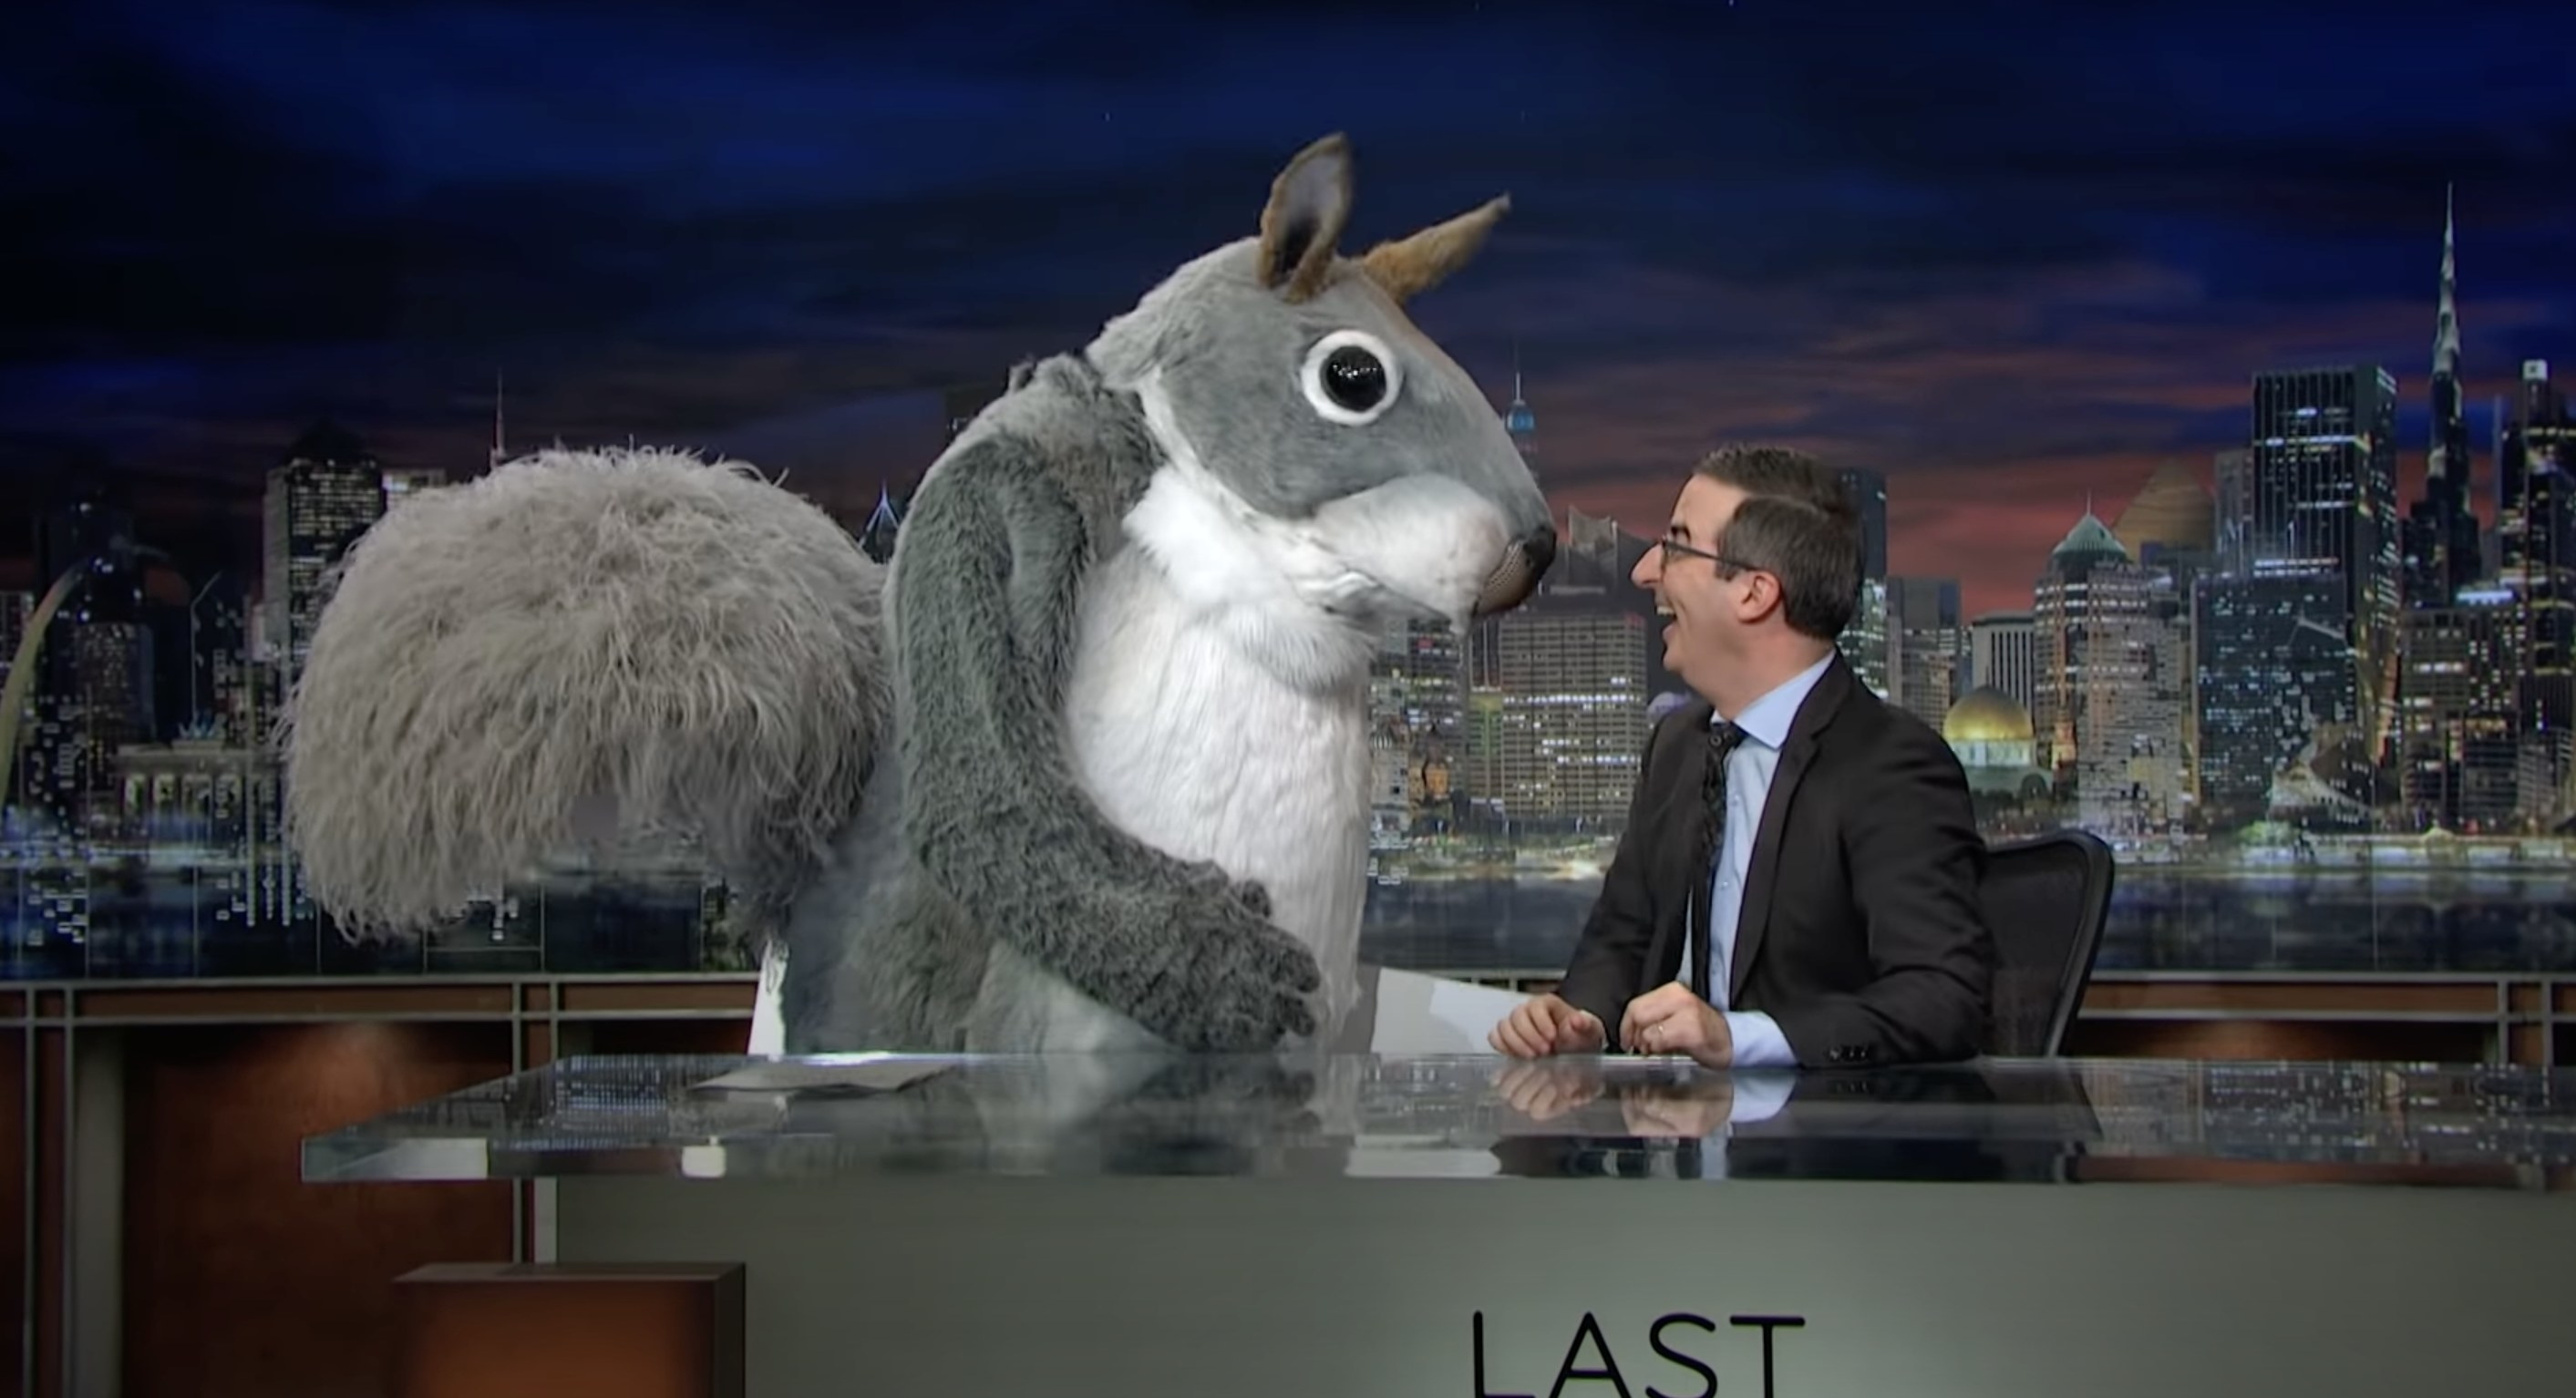 John Oliver at his desk smiling at a giant squirrel mascot standing next to him